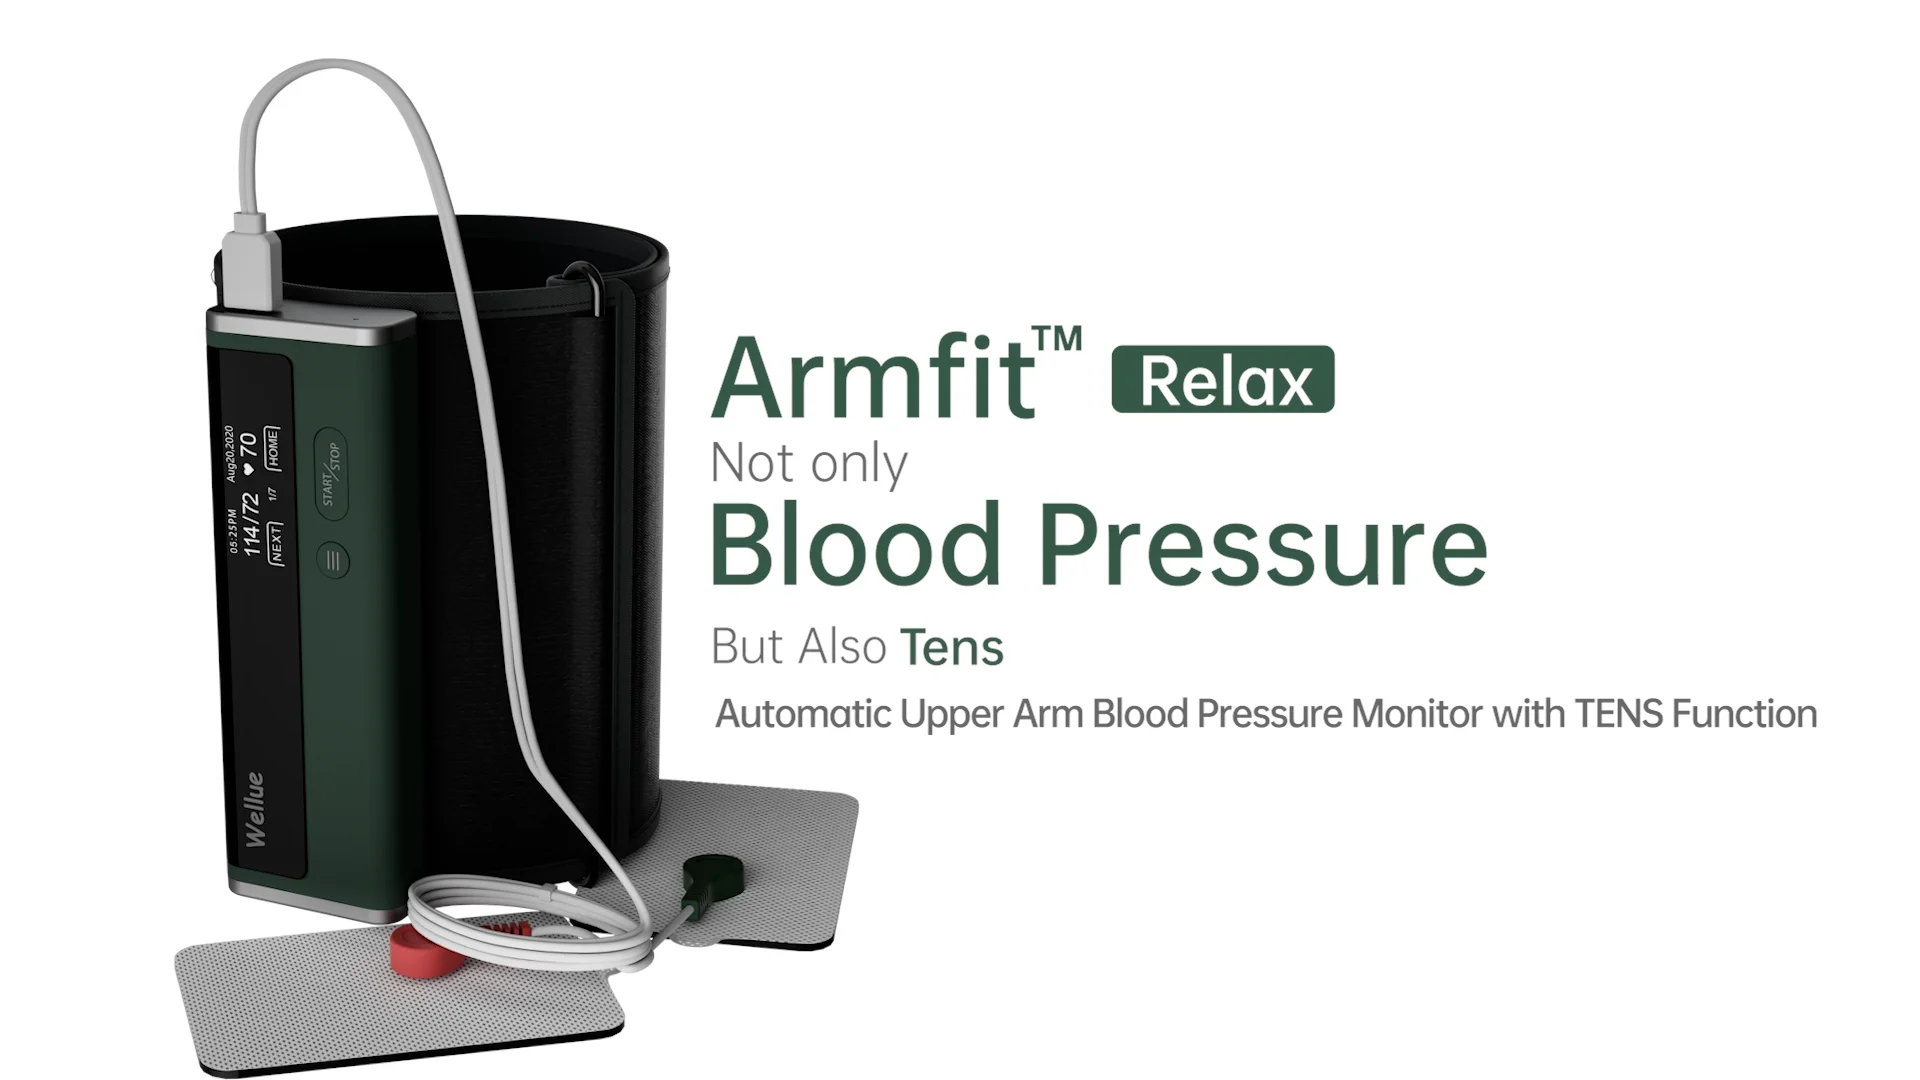 Automatic blood pressure monitor with muscle stimulation- Wellue on Vimeo